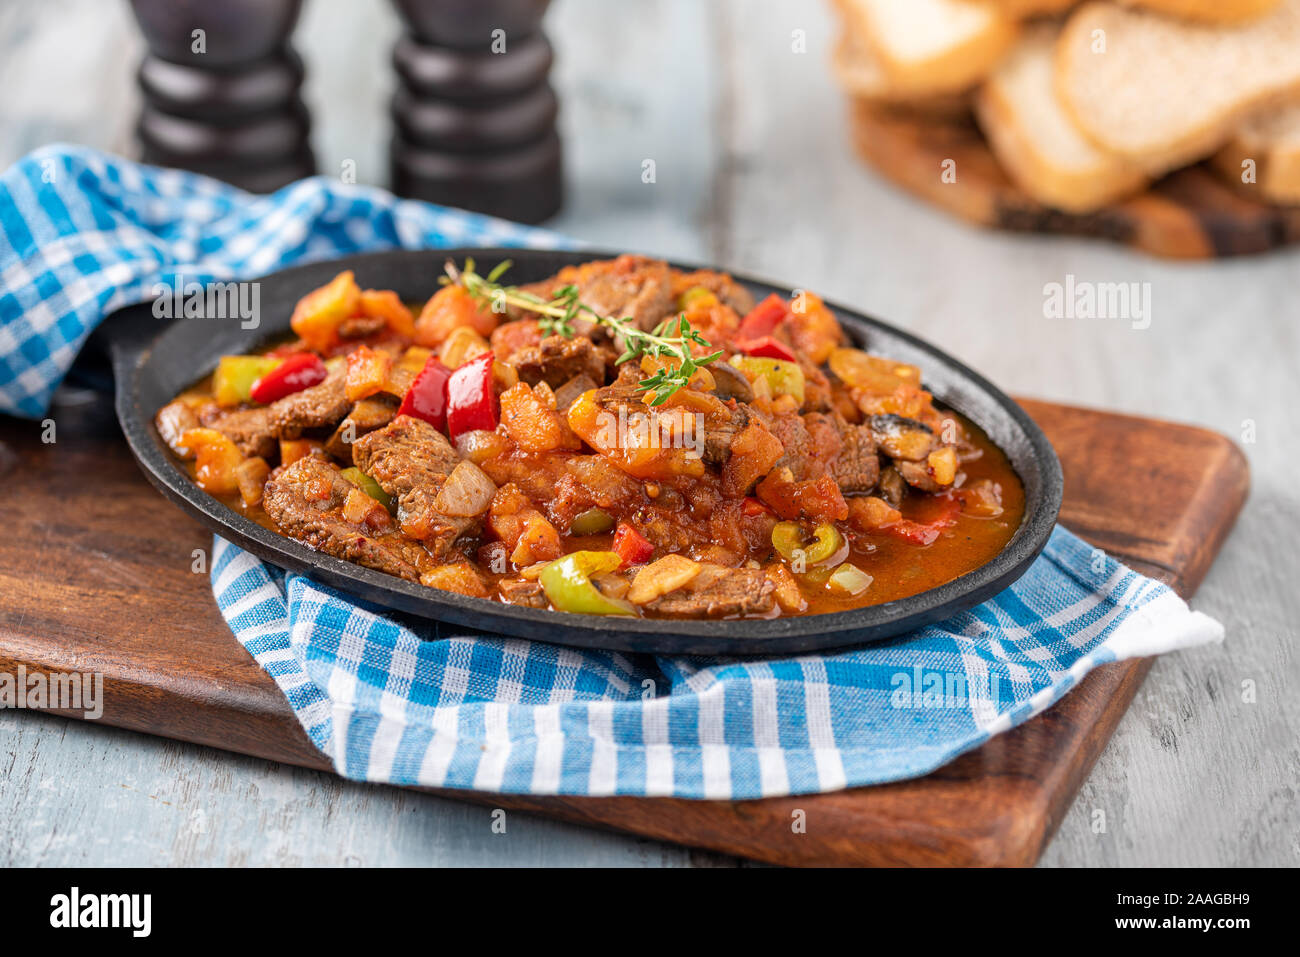 Beef stew with potatoes, carrots and herbs in iron casserole, top view Stock Photo